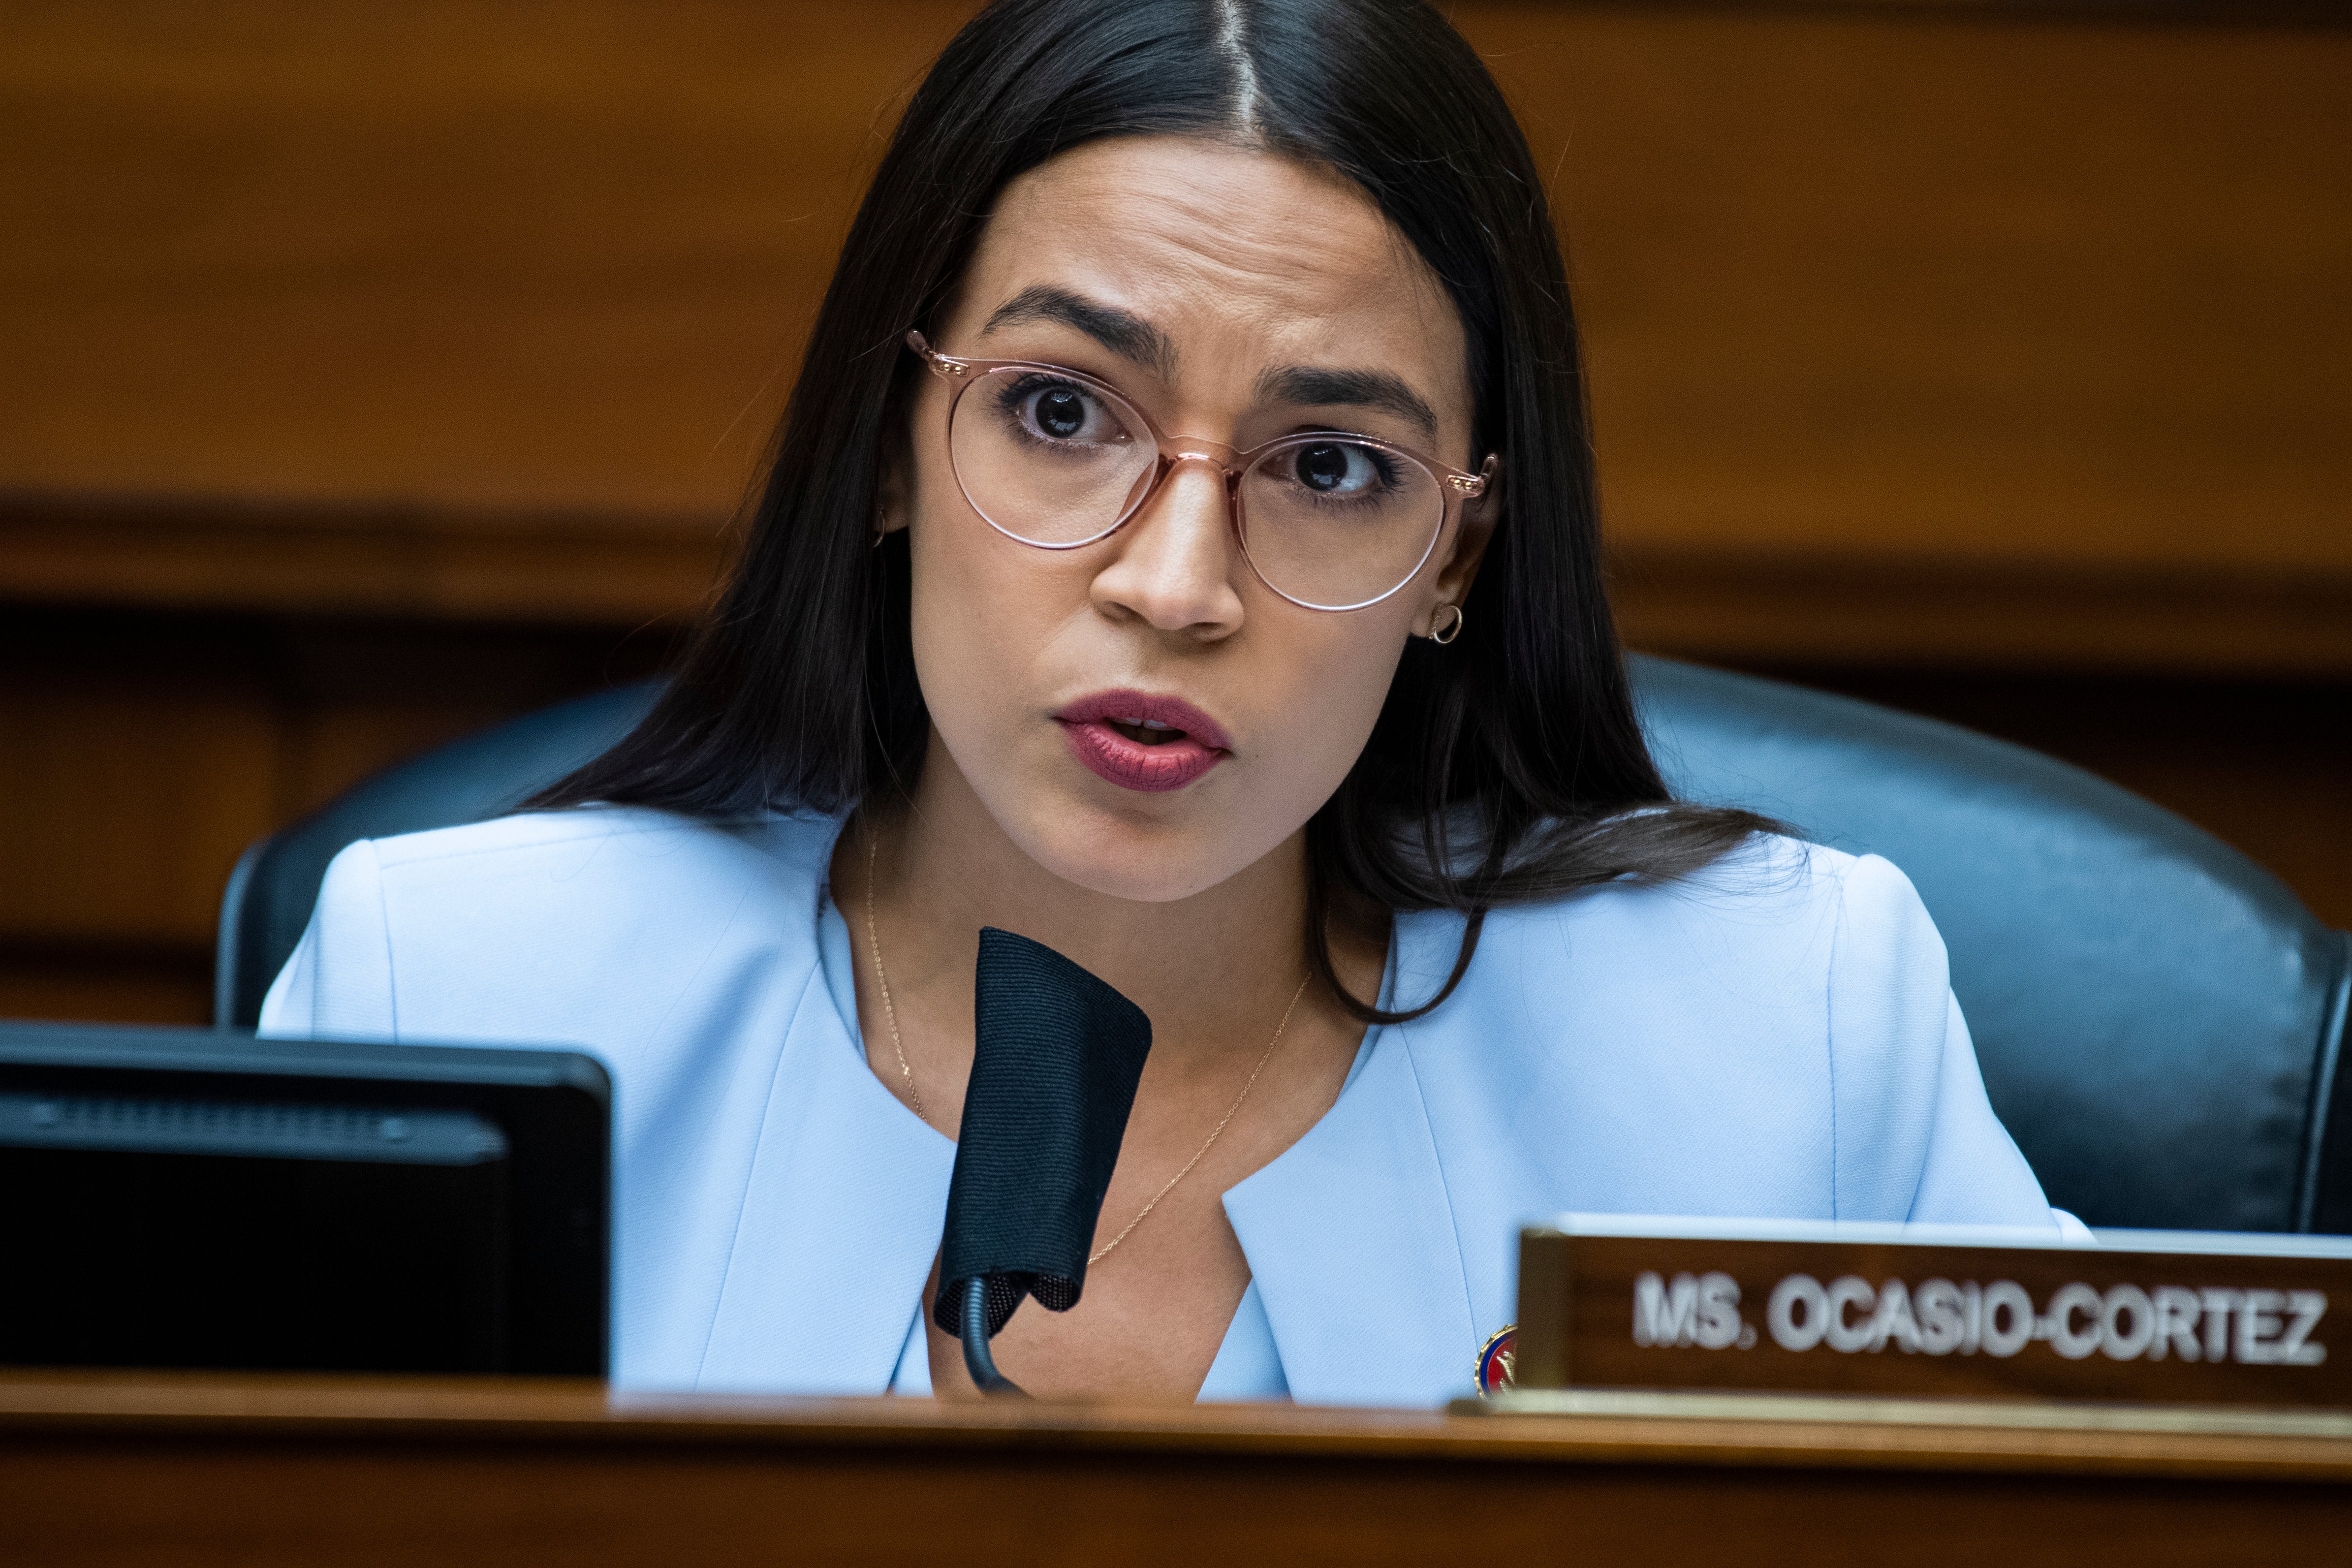 Alexandria Ocasio-Cortez (D-NY) questions Postmaster General Louis DeJoy during a hearing before the House Oversight and Reform Committee on August 24, 2020 in Washington, DC.